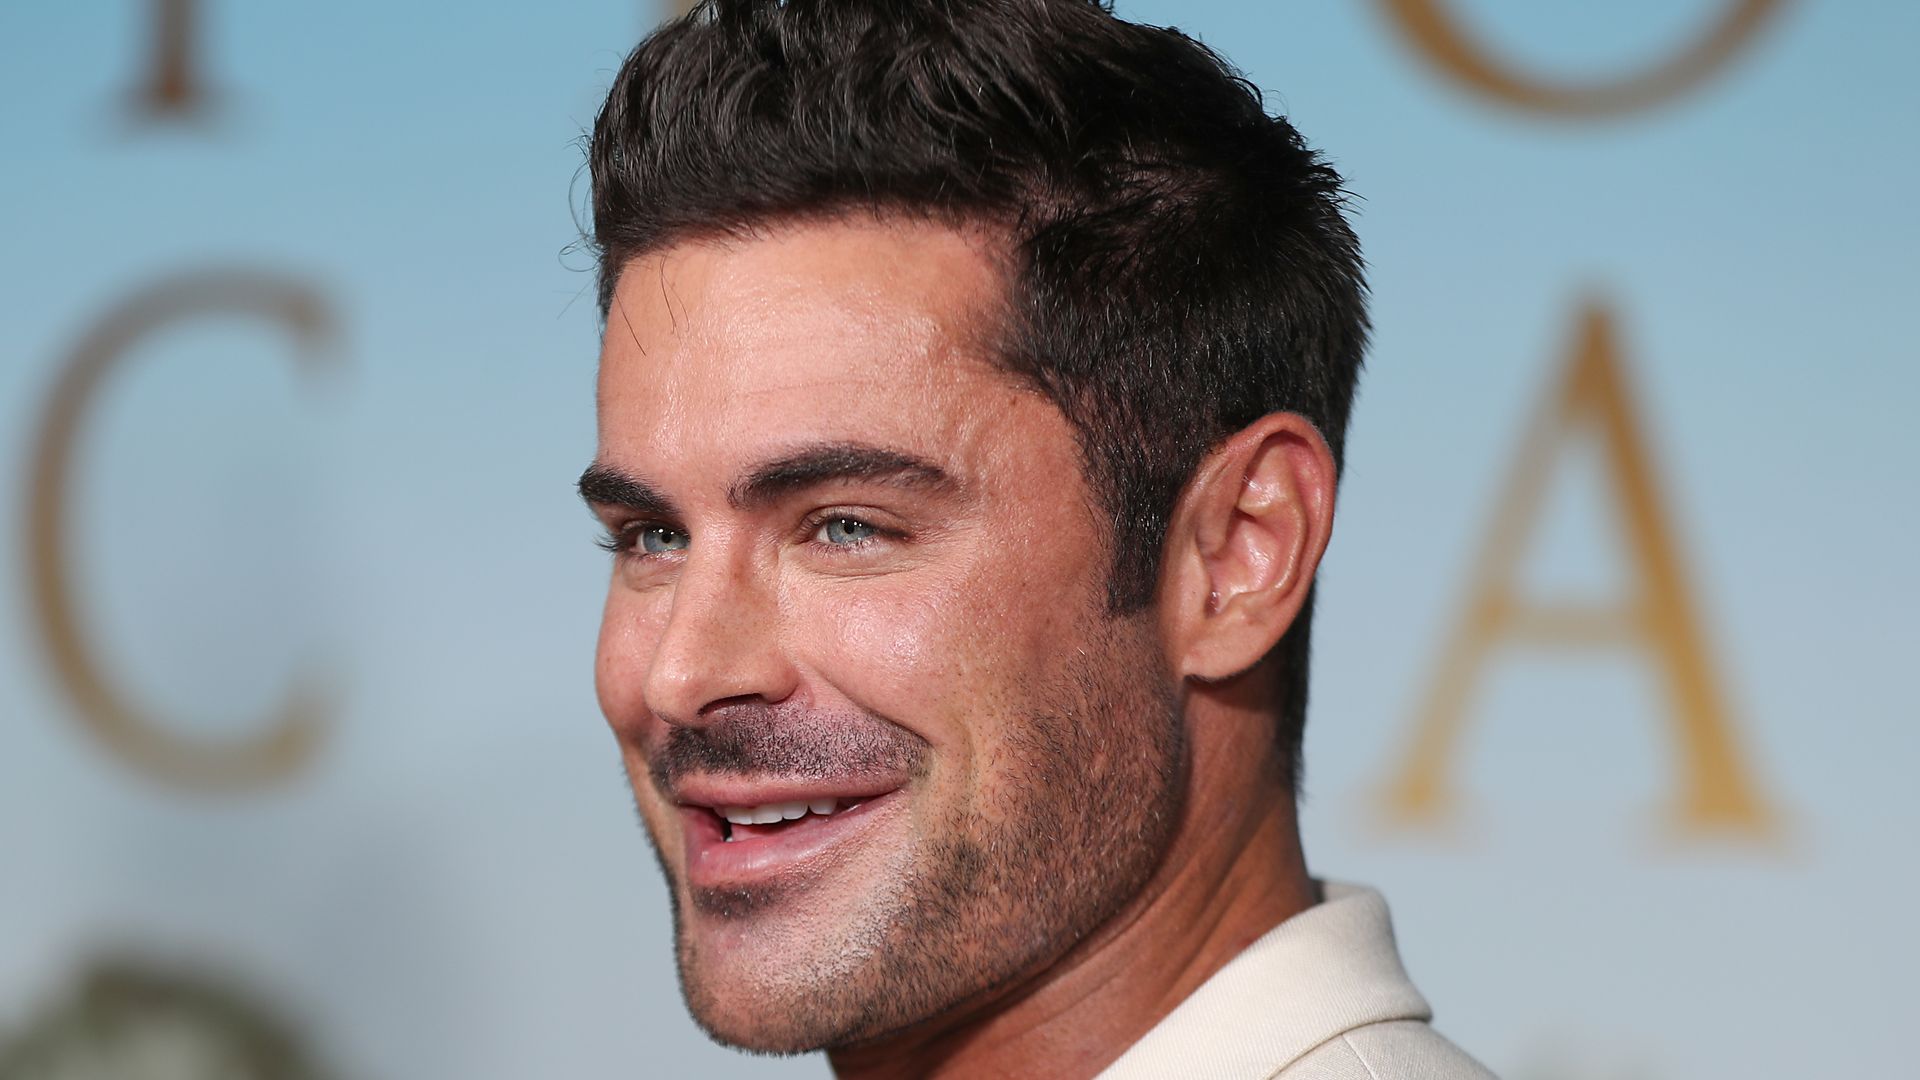 Zac Efron's dramatic Hollywood glow-up including teeth transformation explained